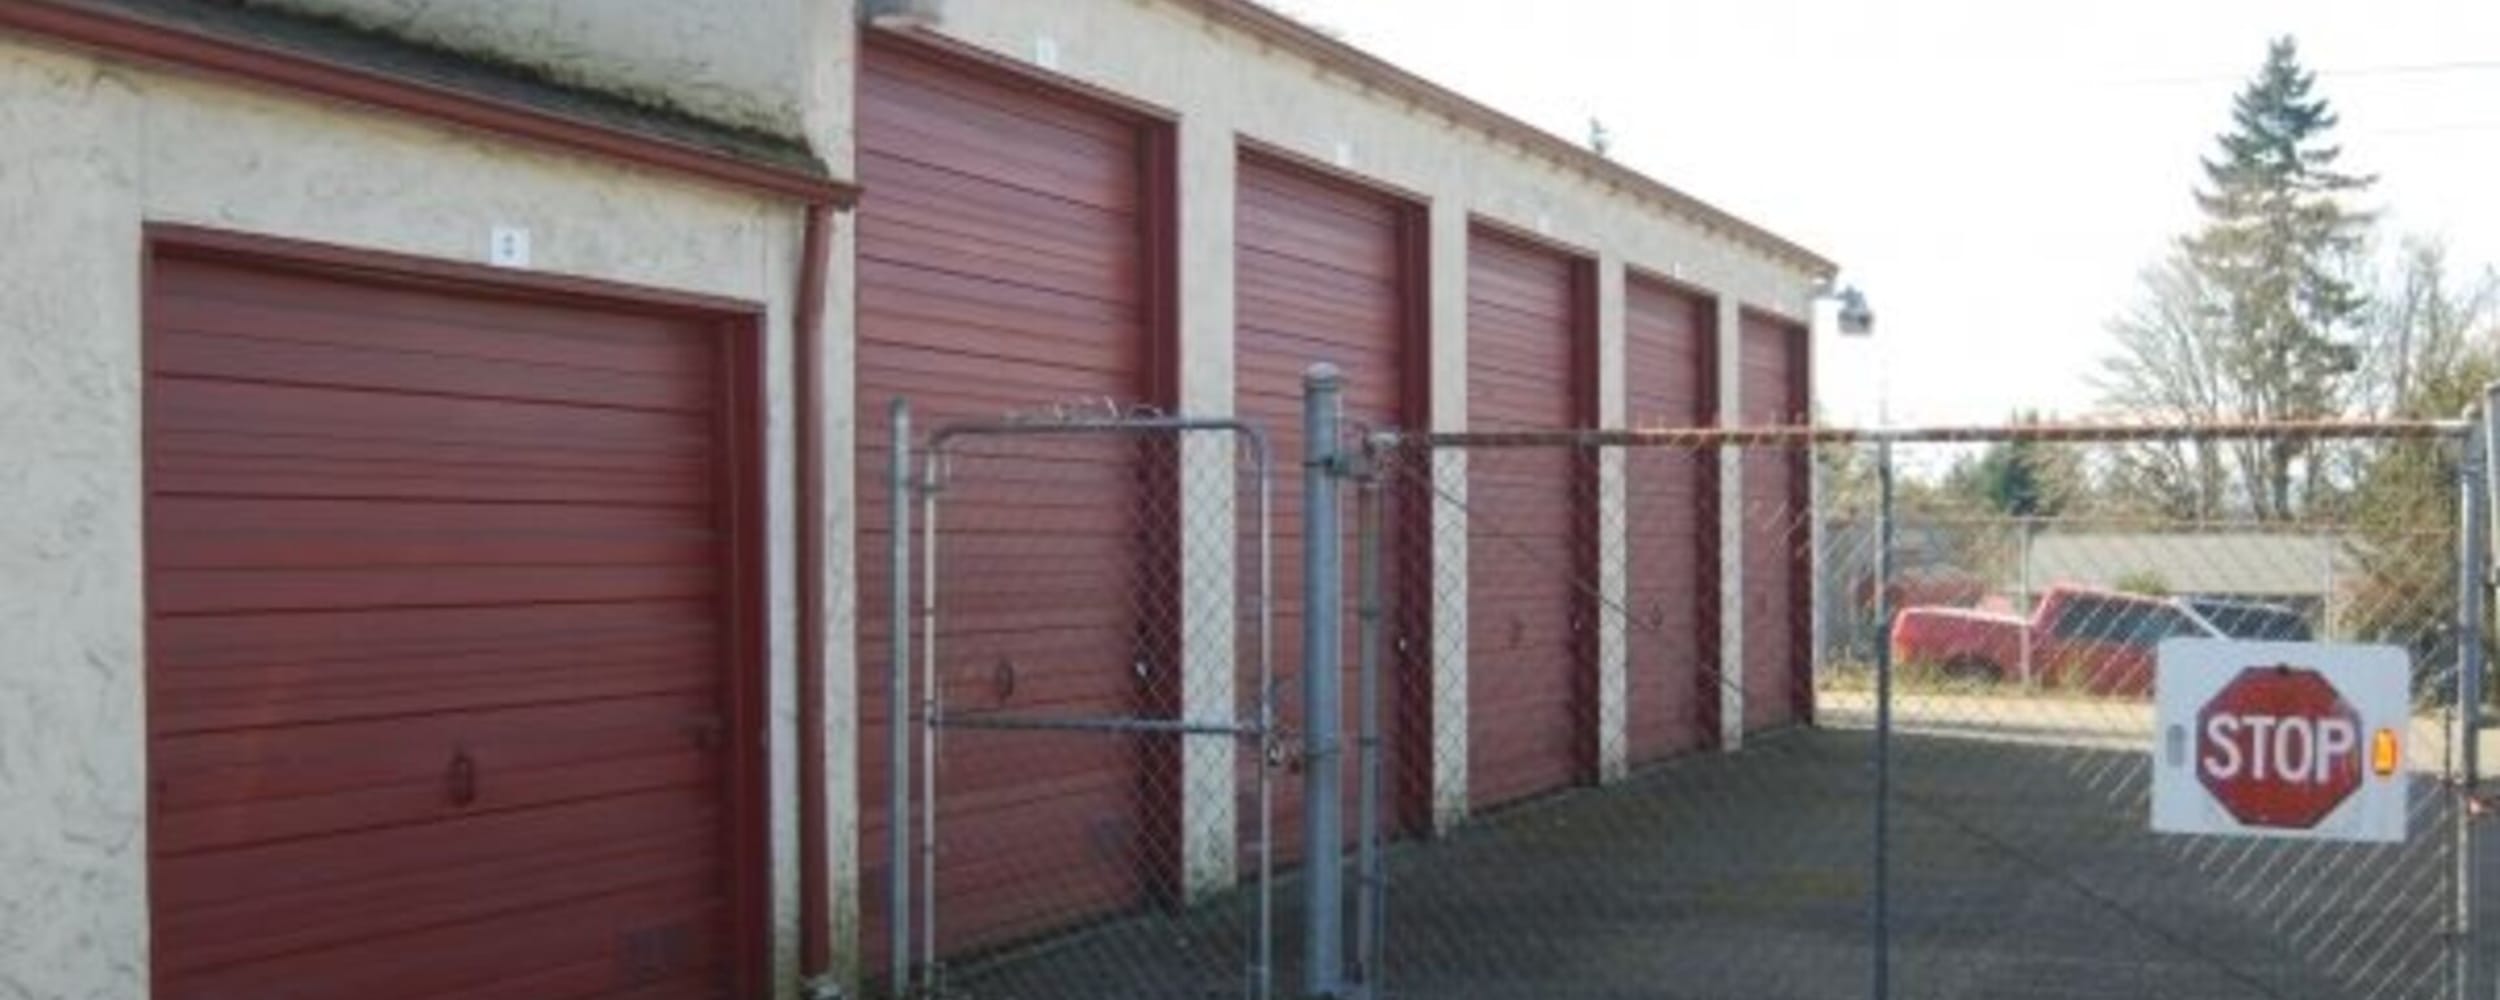 Gated entrance to Space Station Self Storage in Port Orchard, Washington